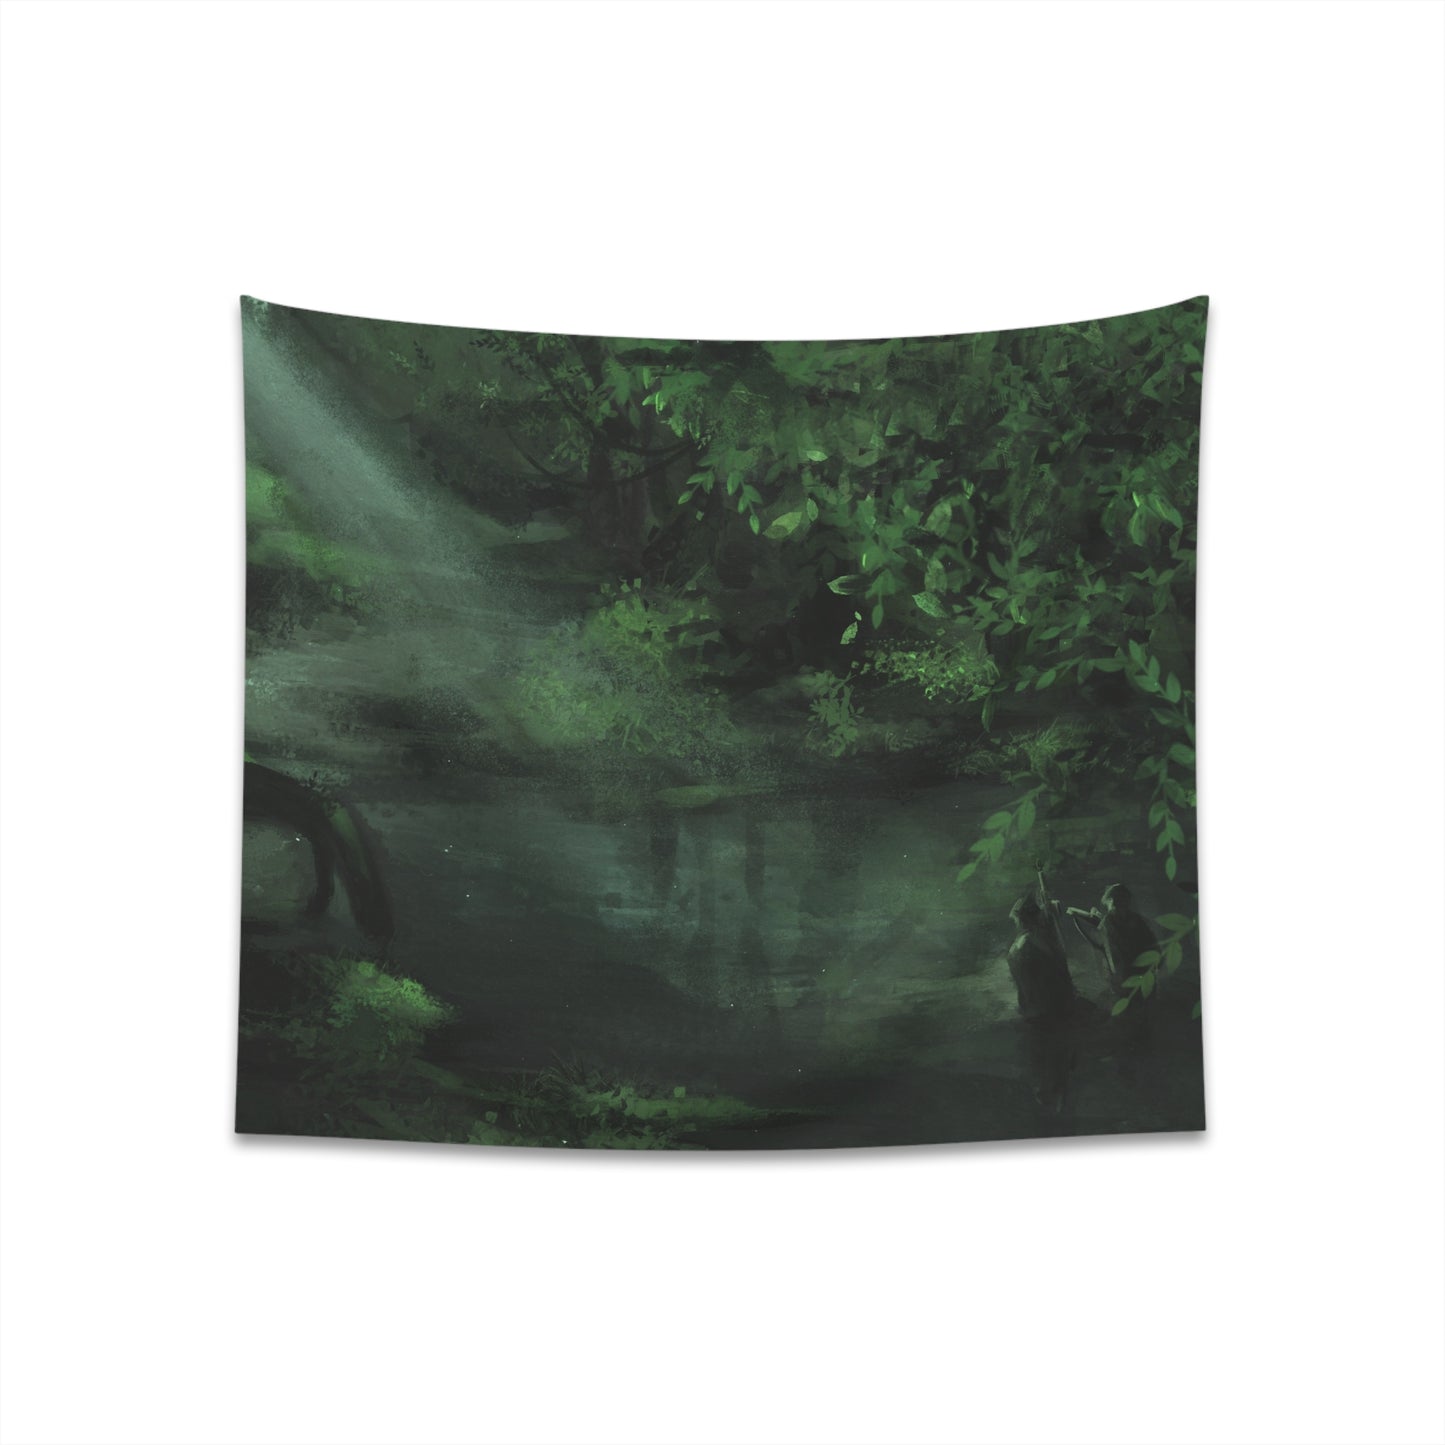 Swamp Wall Tapestry